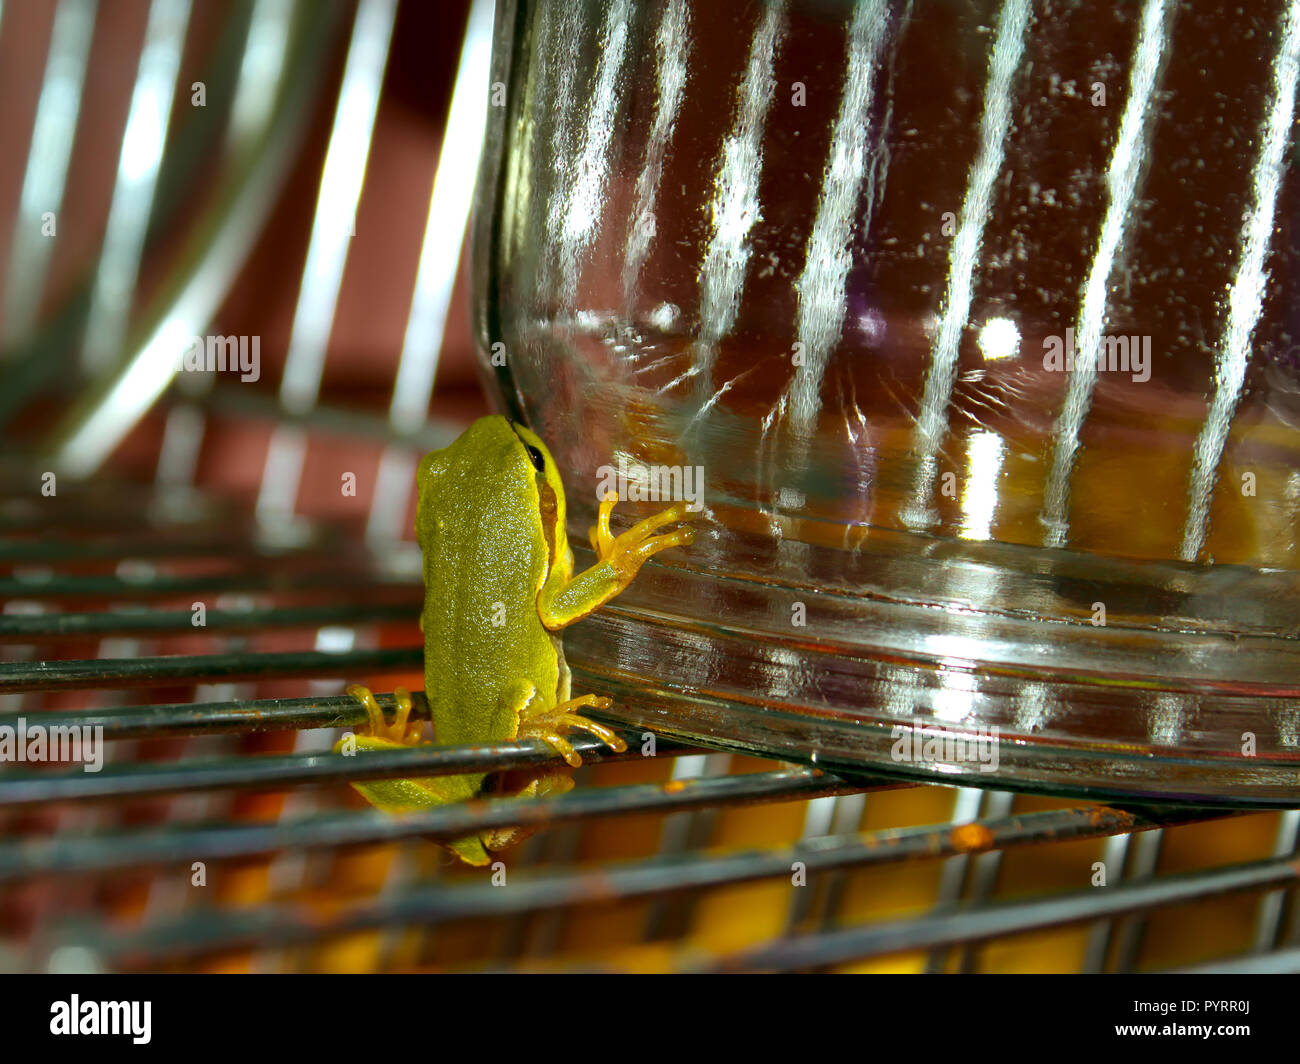 Tree Frog at night on a drying rack Stock Photo